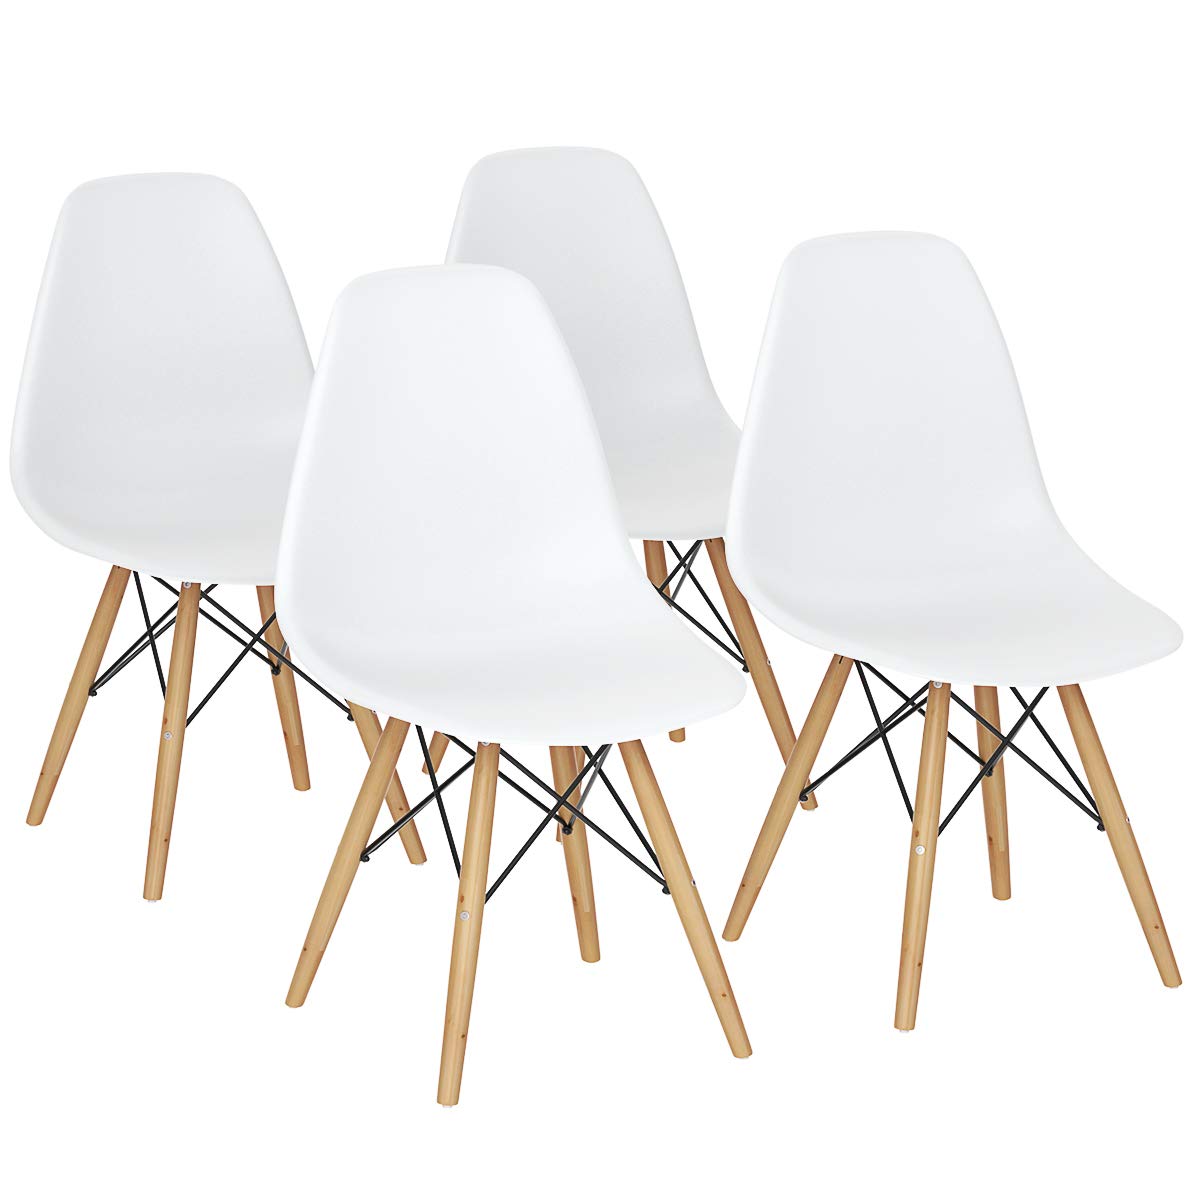 Giantex Dining DSW Chairs with Linen Cushion, Modern Mid Century Shell Chairs w/ Wood Legs